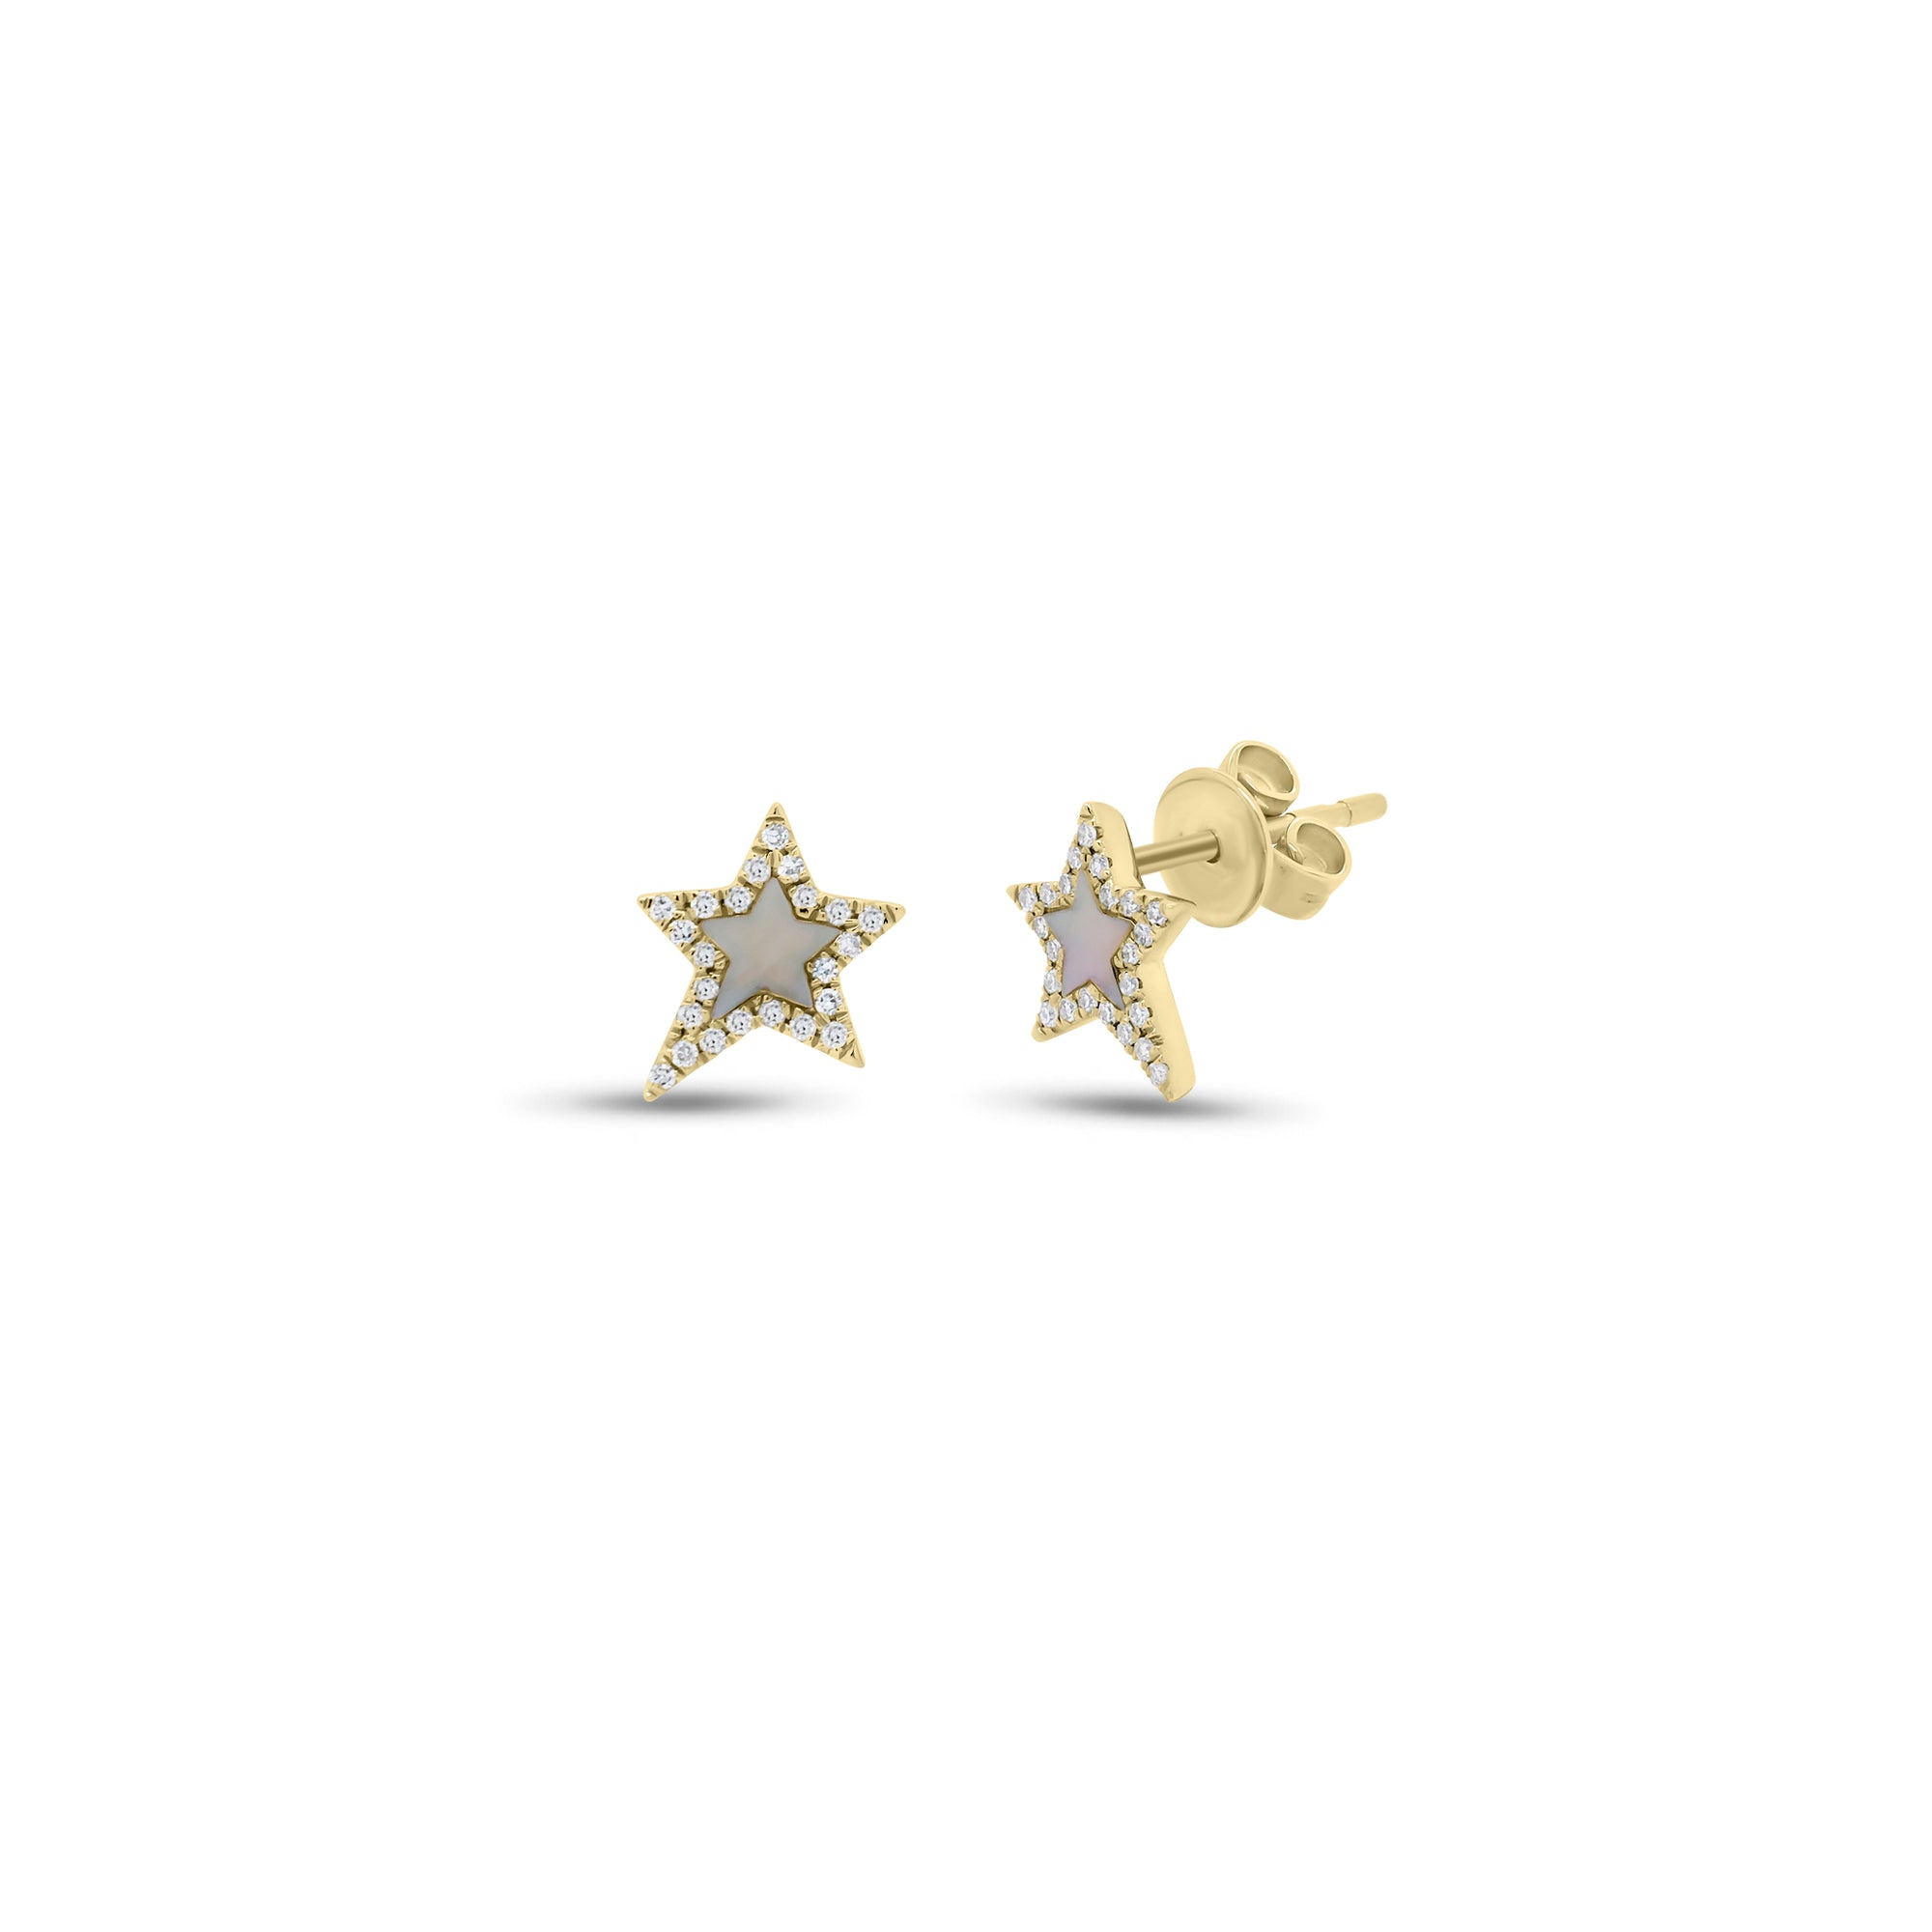 Mother of Pearl & Diamond Star Stud Earring - 14K gold weighing 1.36 grams  - 46 round diamonds weighing 0.11 carats  - 2 mother-of-pearl slices weighing 0.13 carats